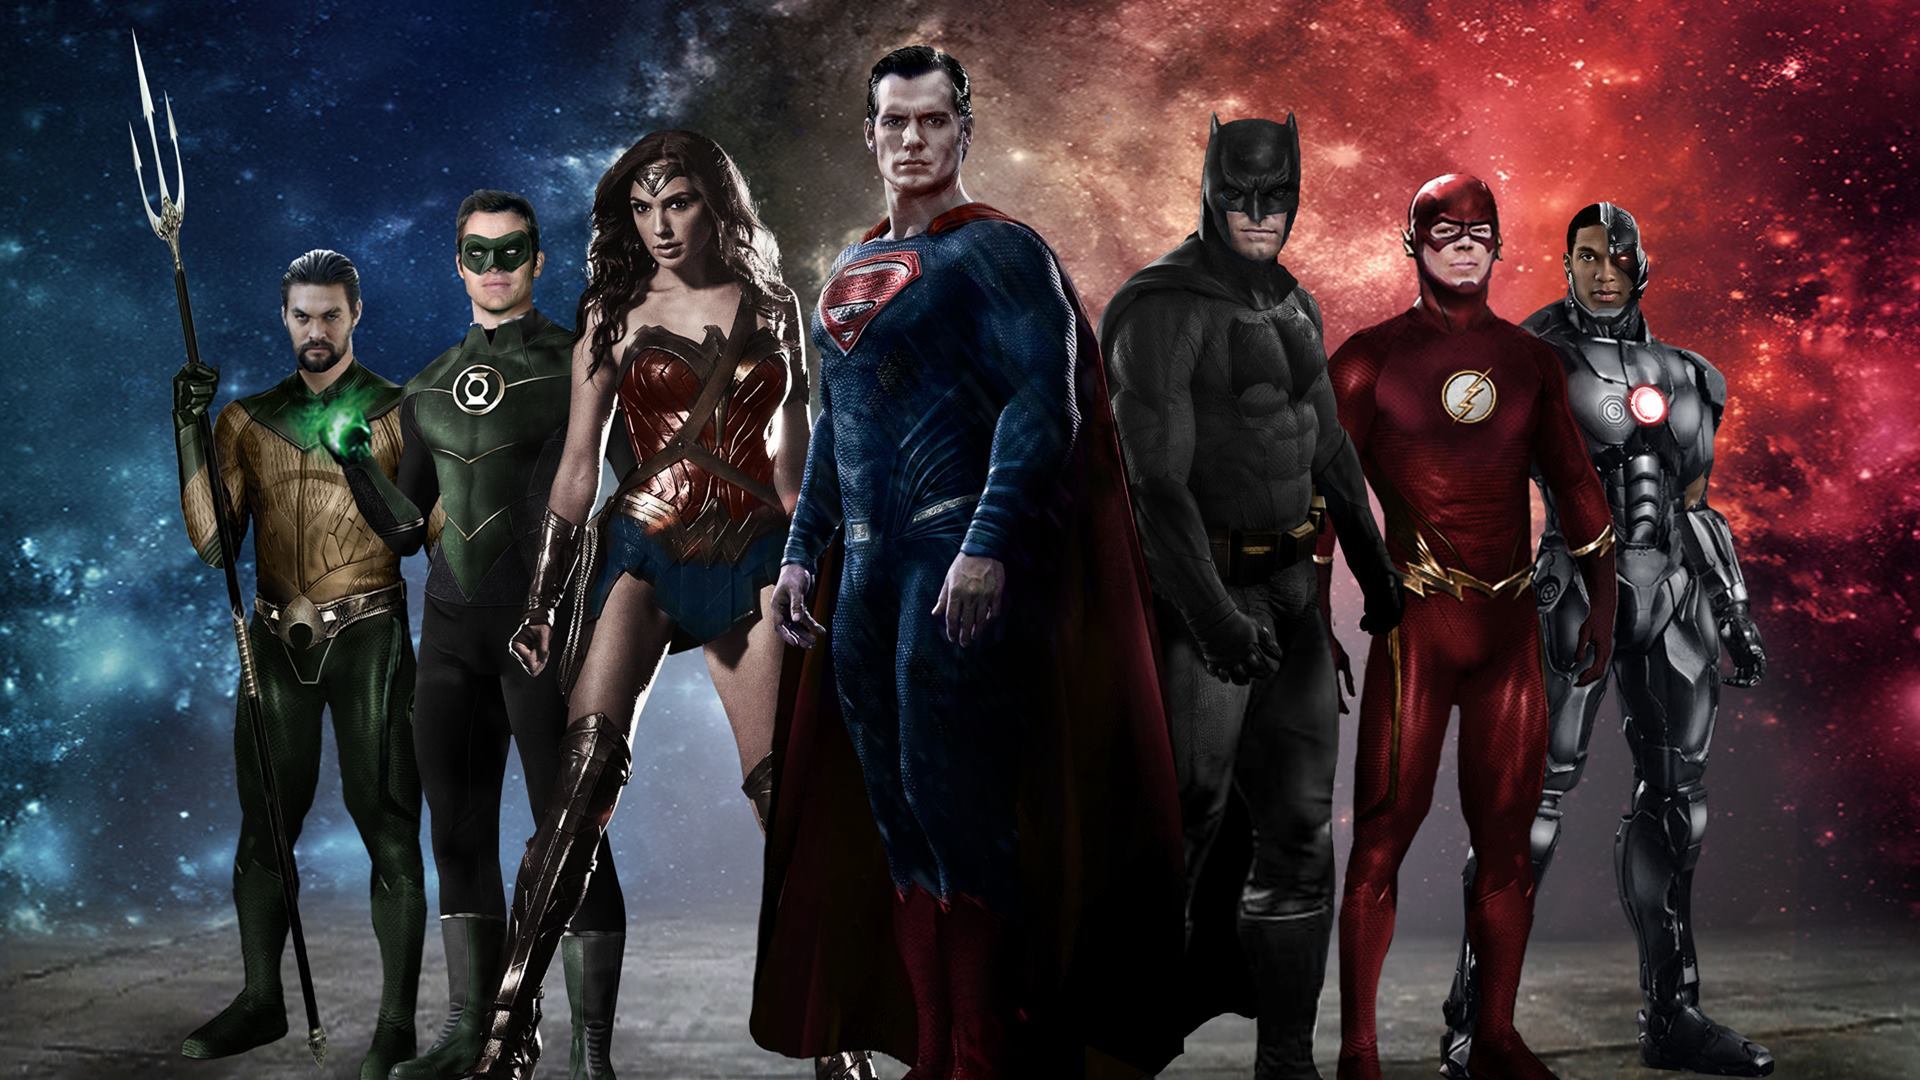 Watch out for these Superhero teams in 2016!